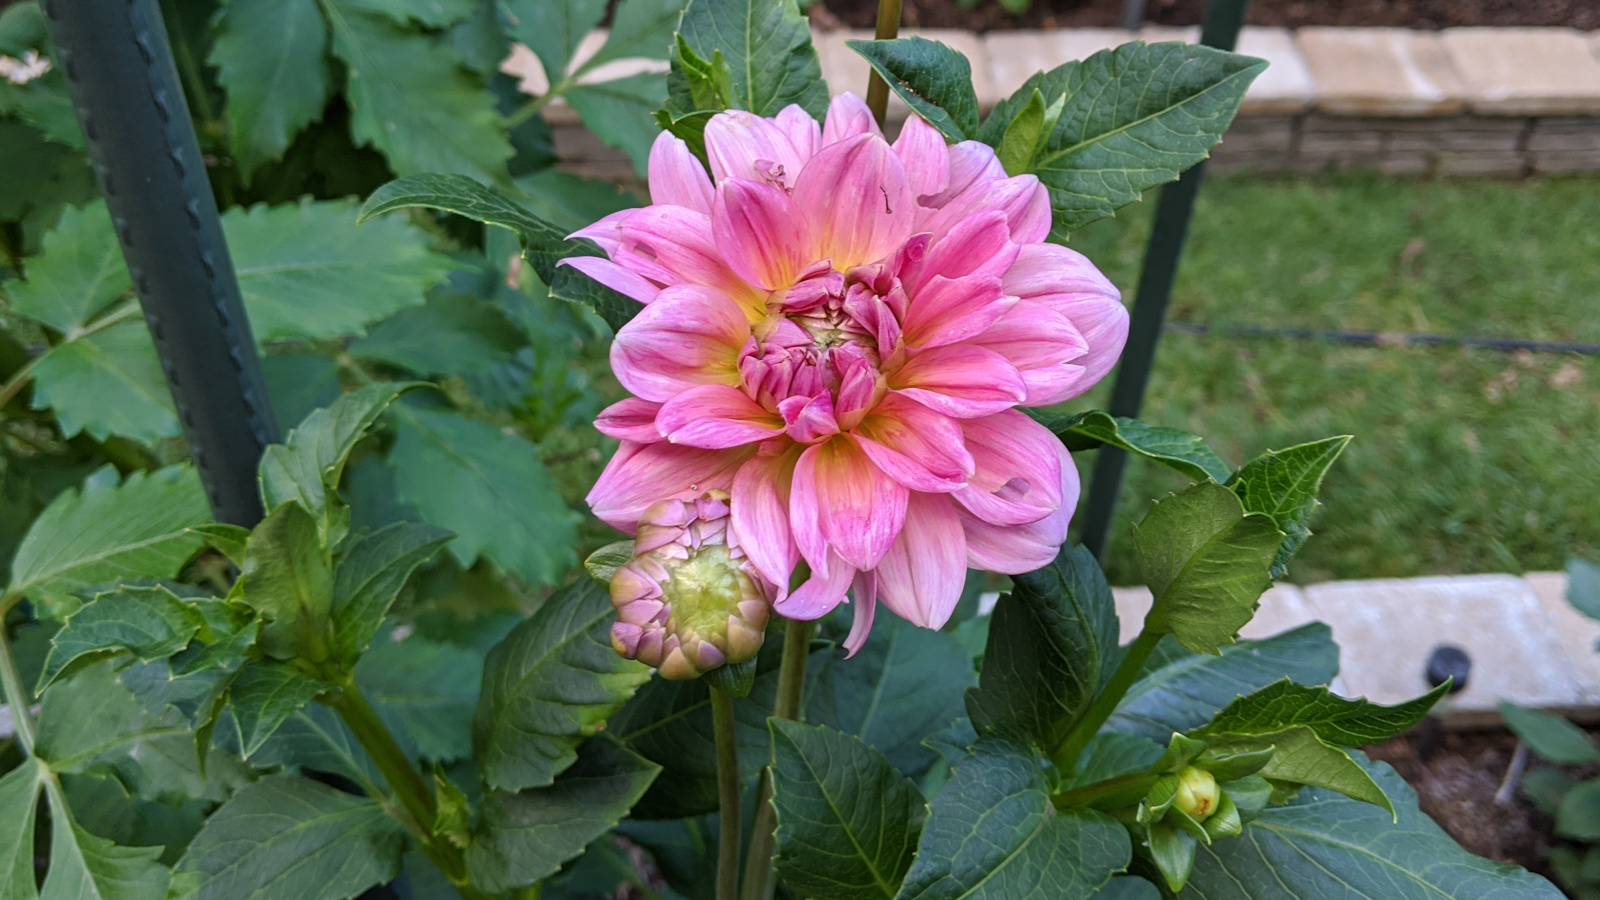 Southern Belle blooming